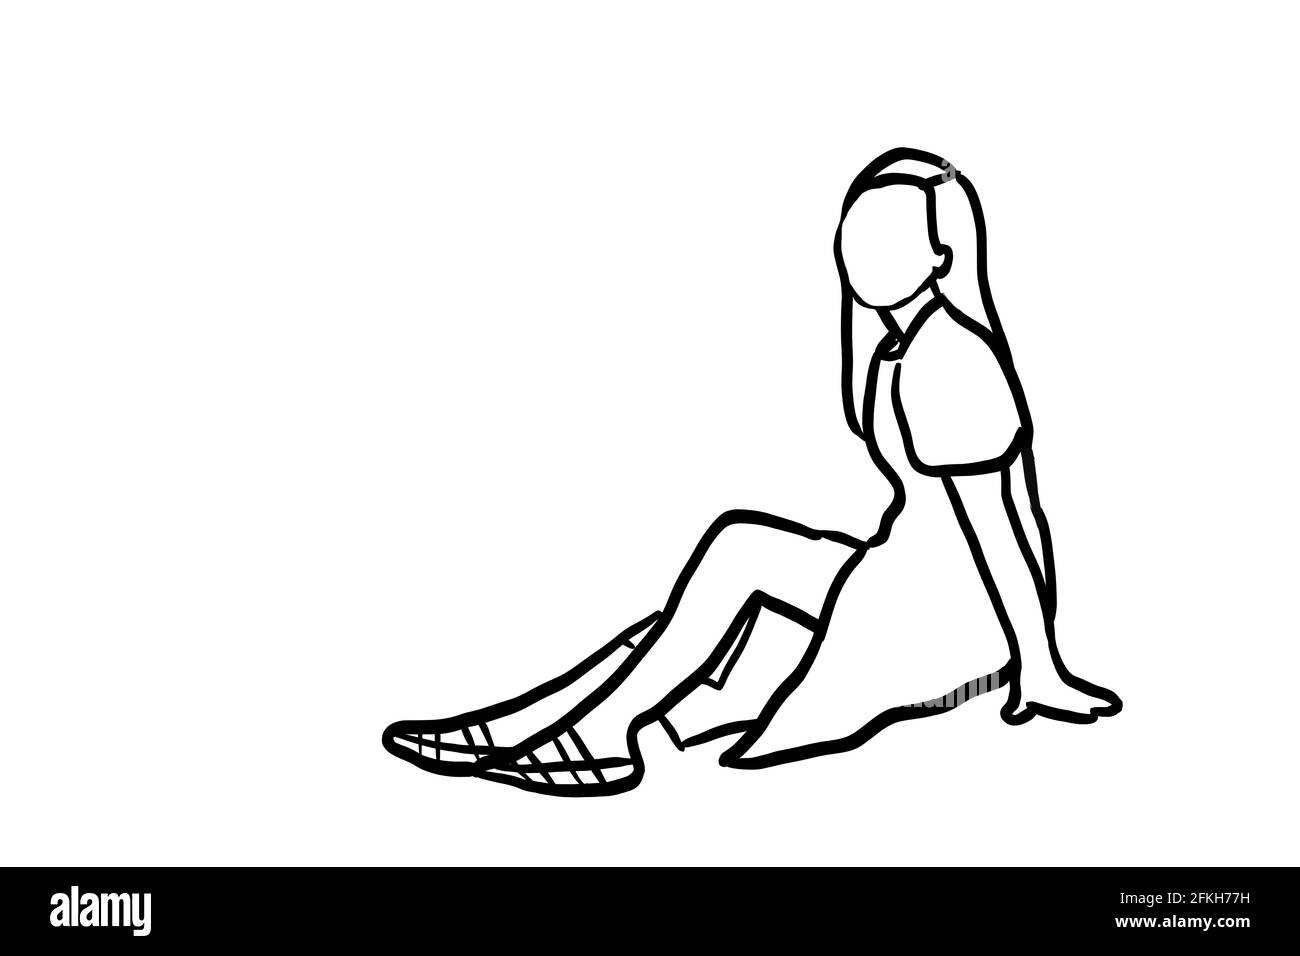 Line drawing woman sitting by the sea, concept continuous line drawing Stock Photo